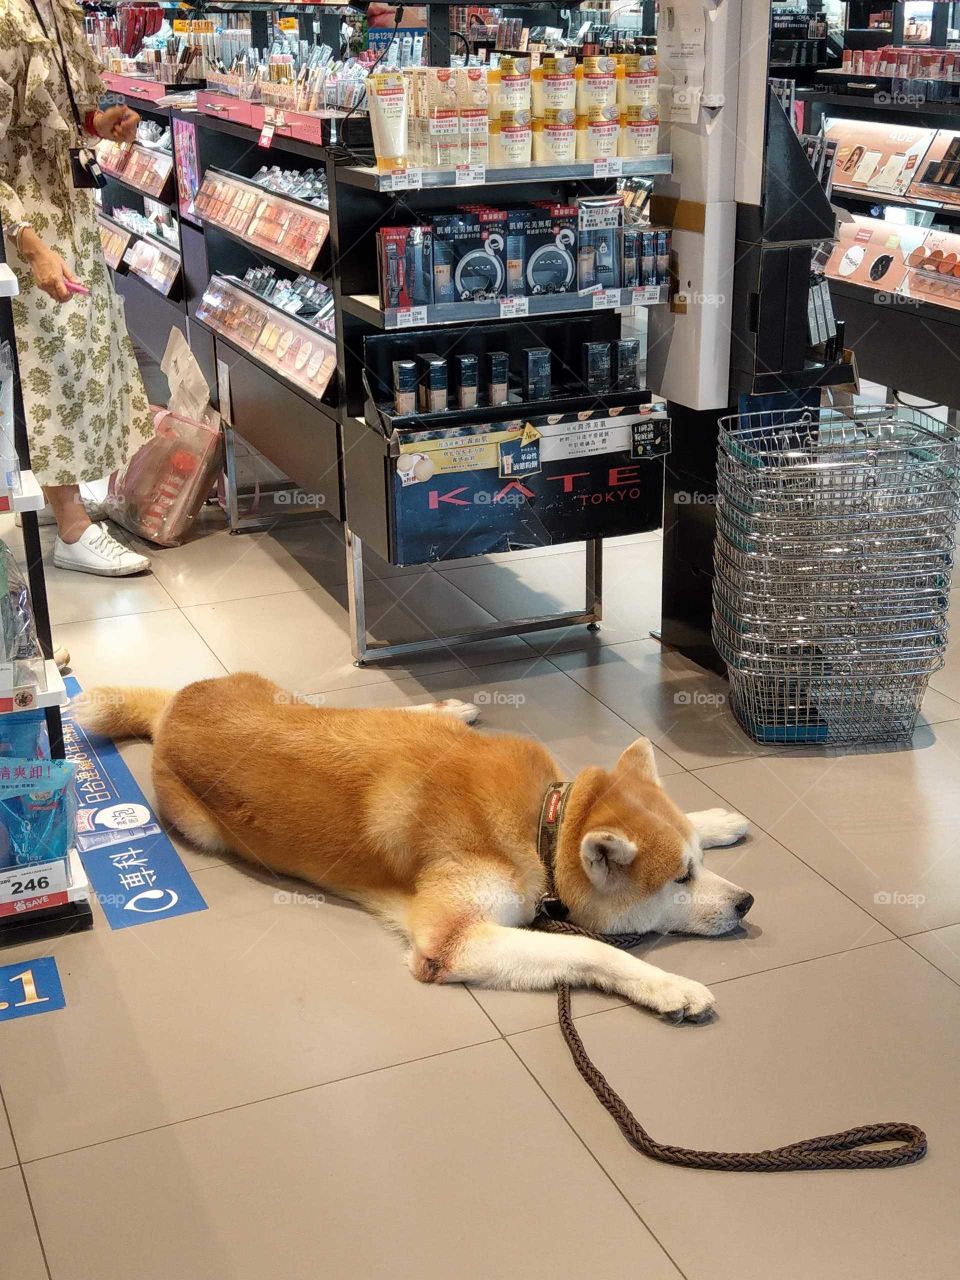 Shopping is too tired.